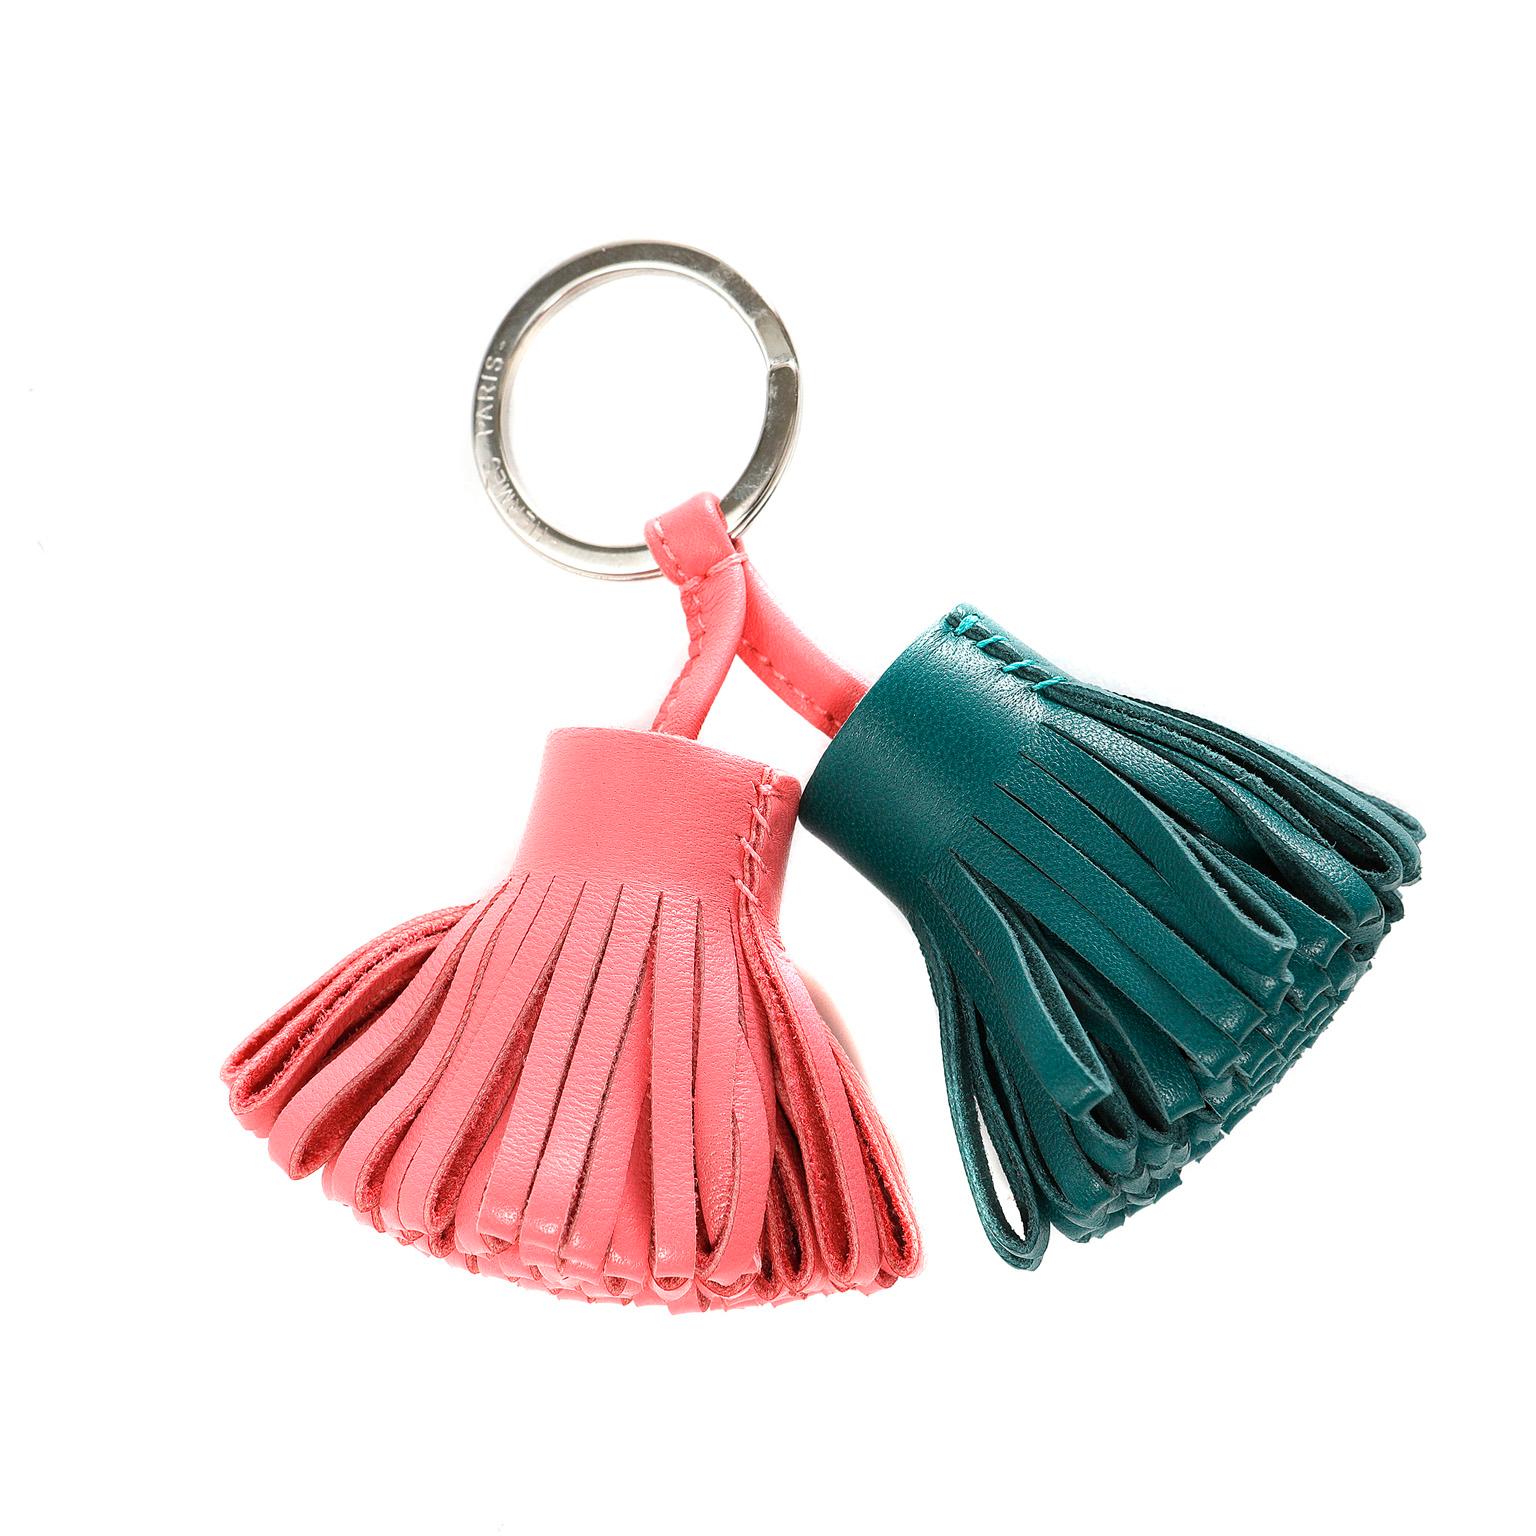 This authentic Hermès Pink and Green Leather Double Tassel Key Holder is in pristine condition.  Silver key ring holds two leather looped tassels in rose pink and dark green. 

PBF 11472